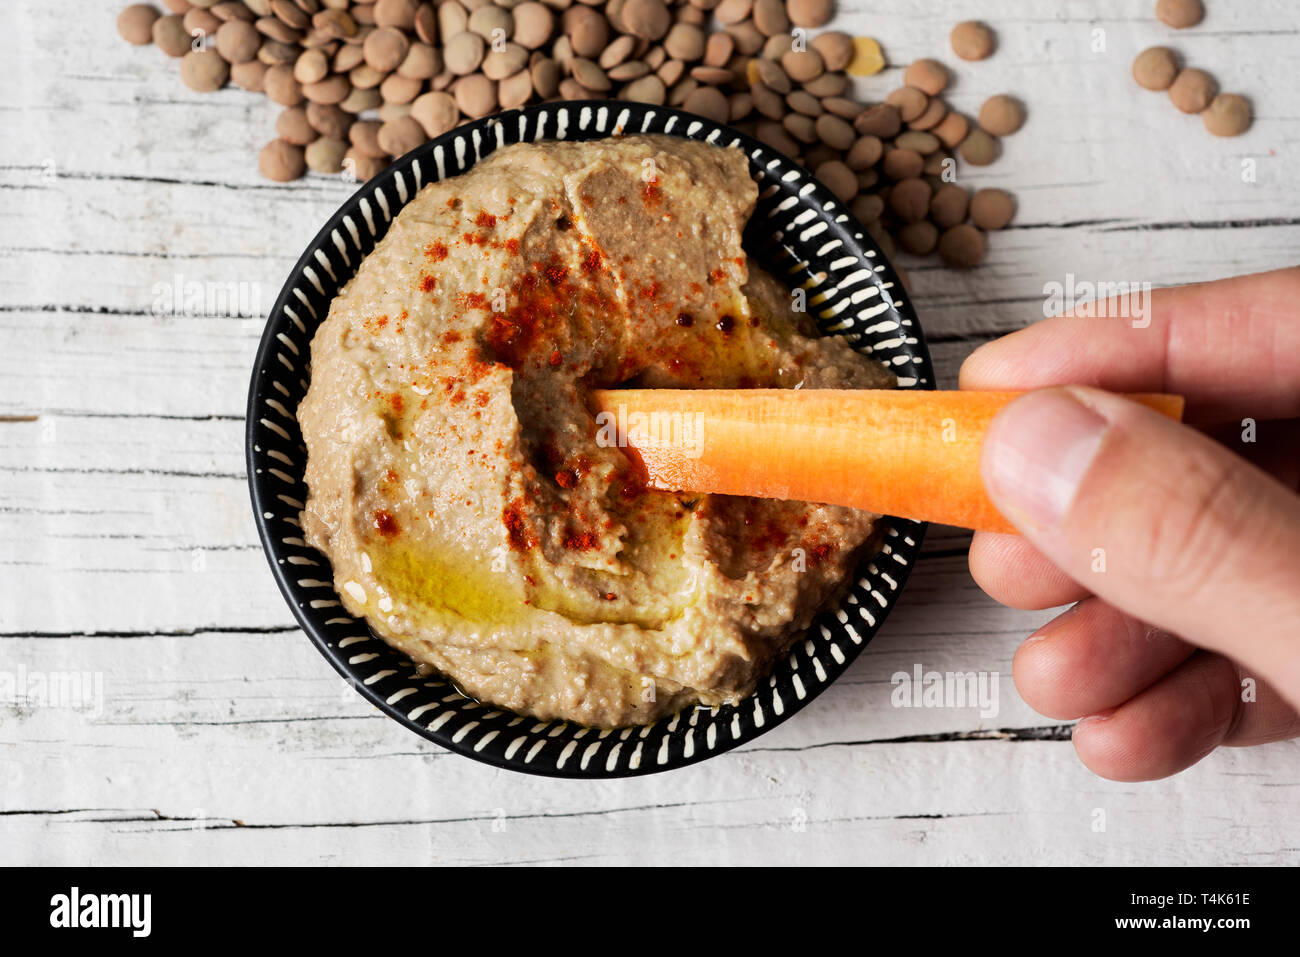 high angle view of a man dipping a strip of carrot in a homemade lentil hummus seasoned with paprika served in a green ceramic plate, on a white rusti Stock Photo